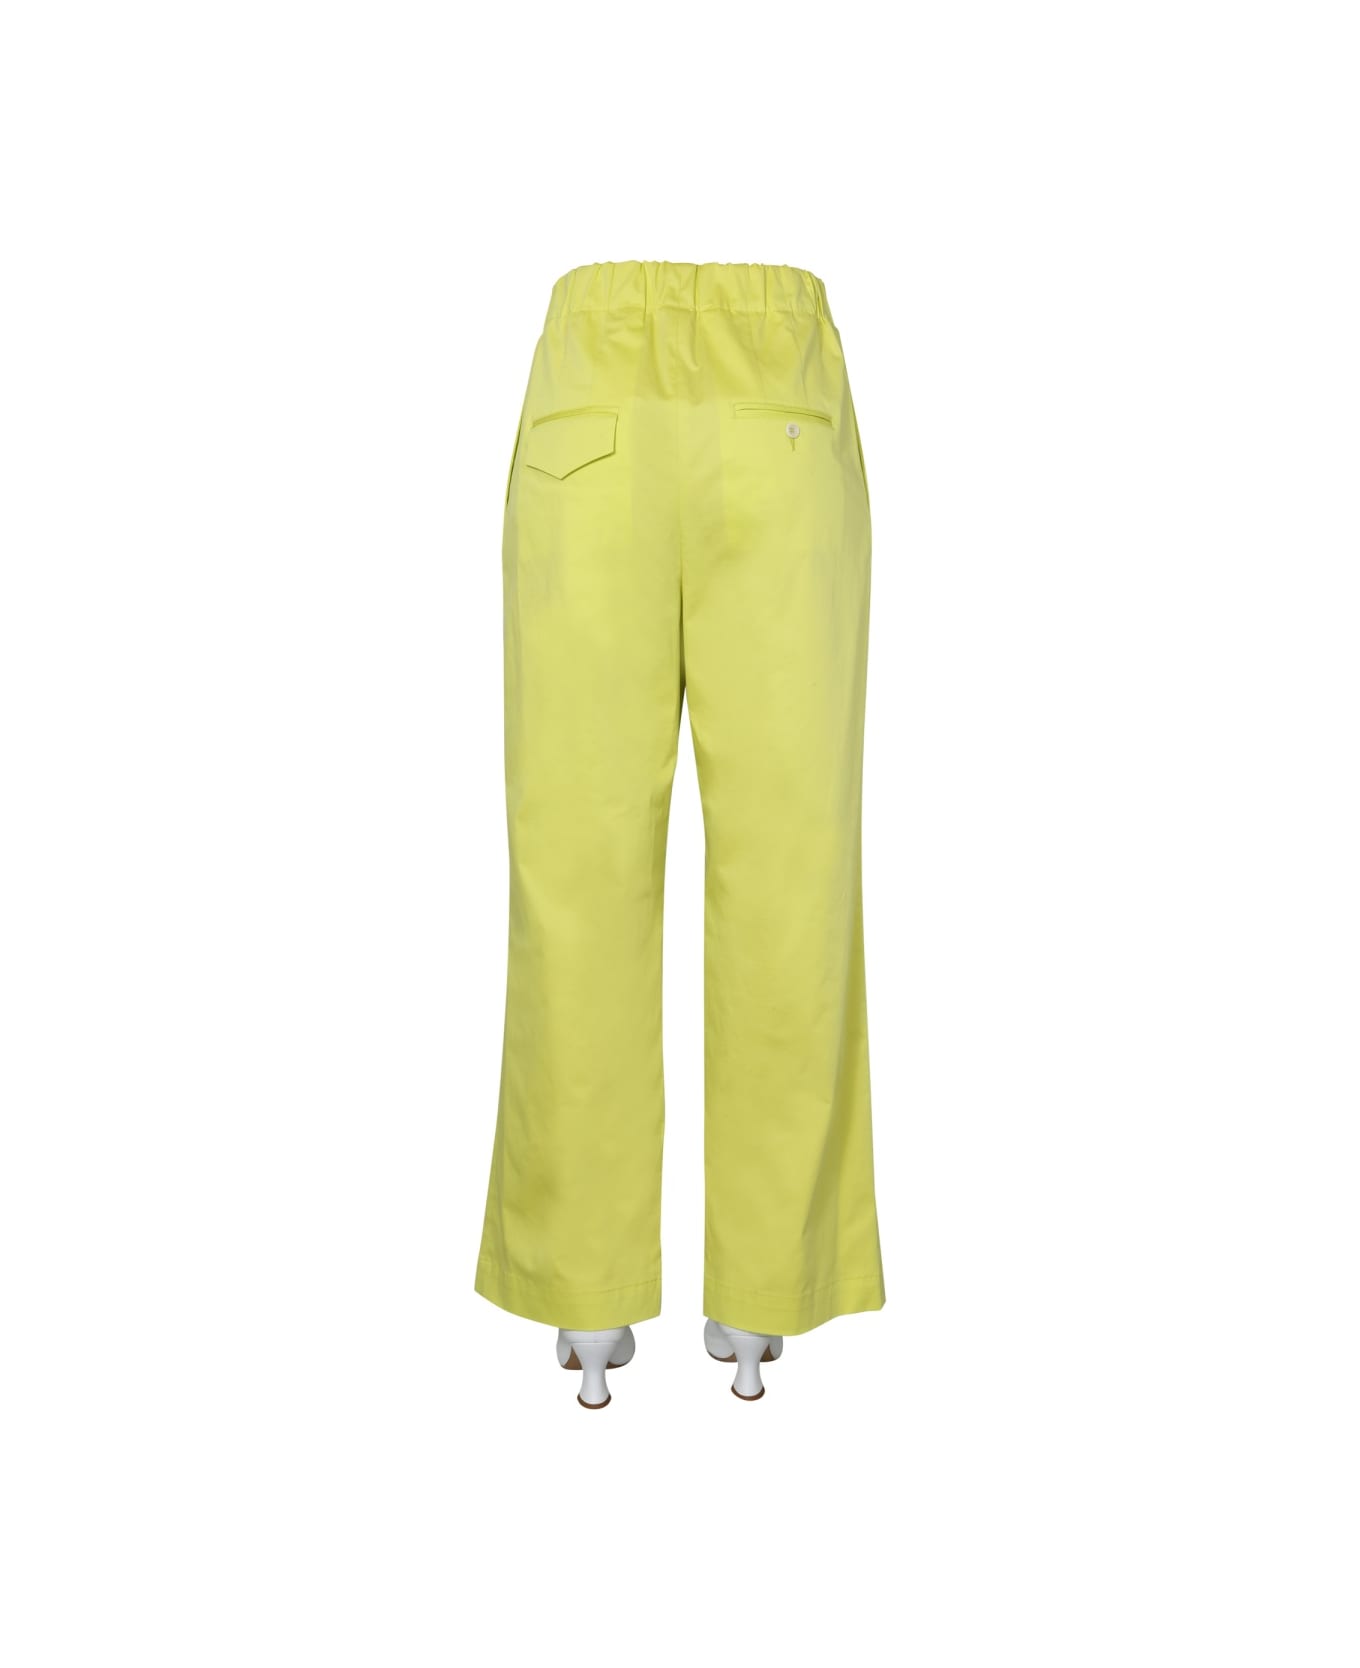 Jejia Wide Trousers - YELLOW ボトムス